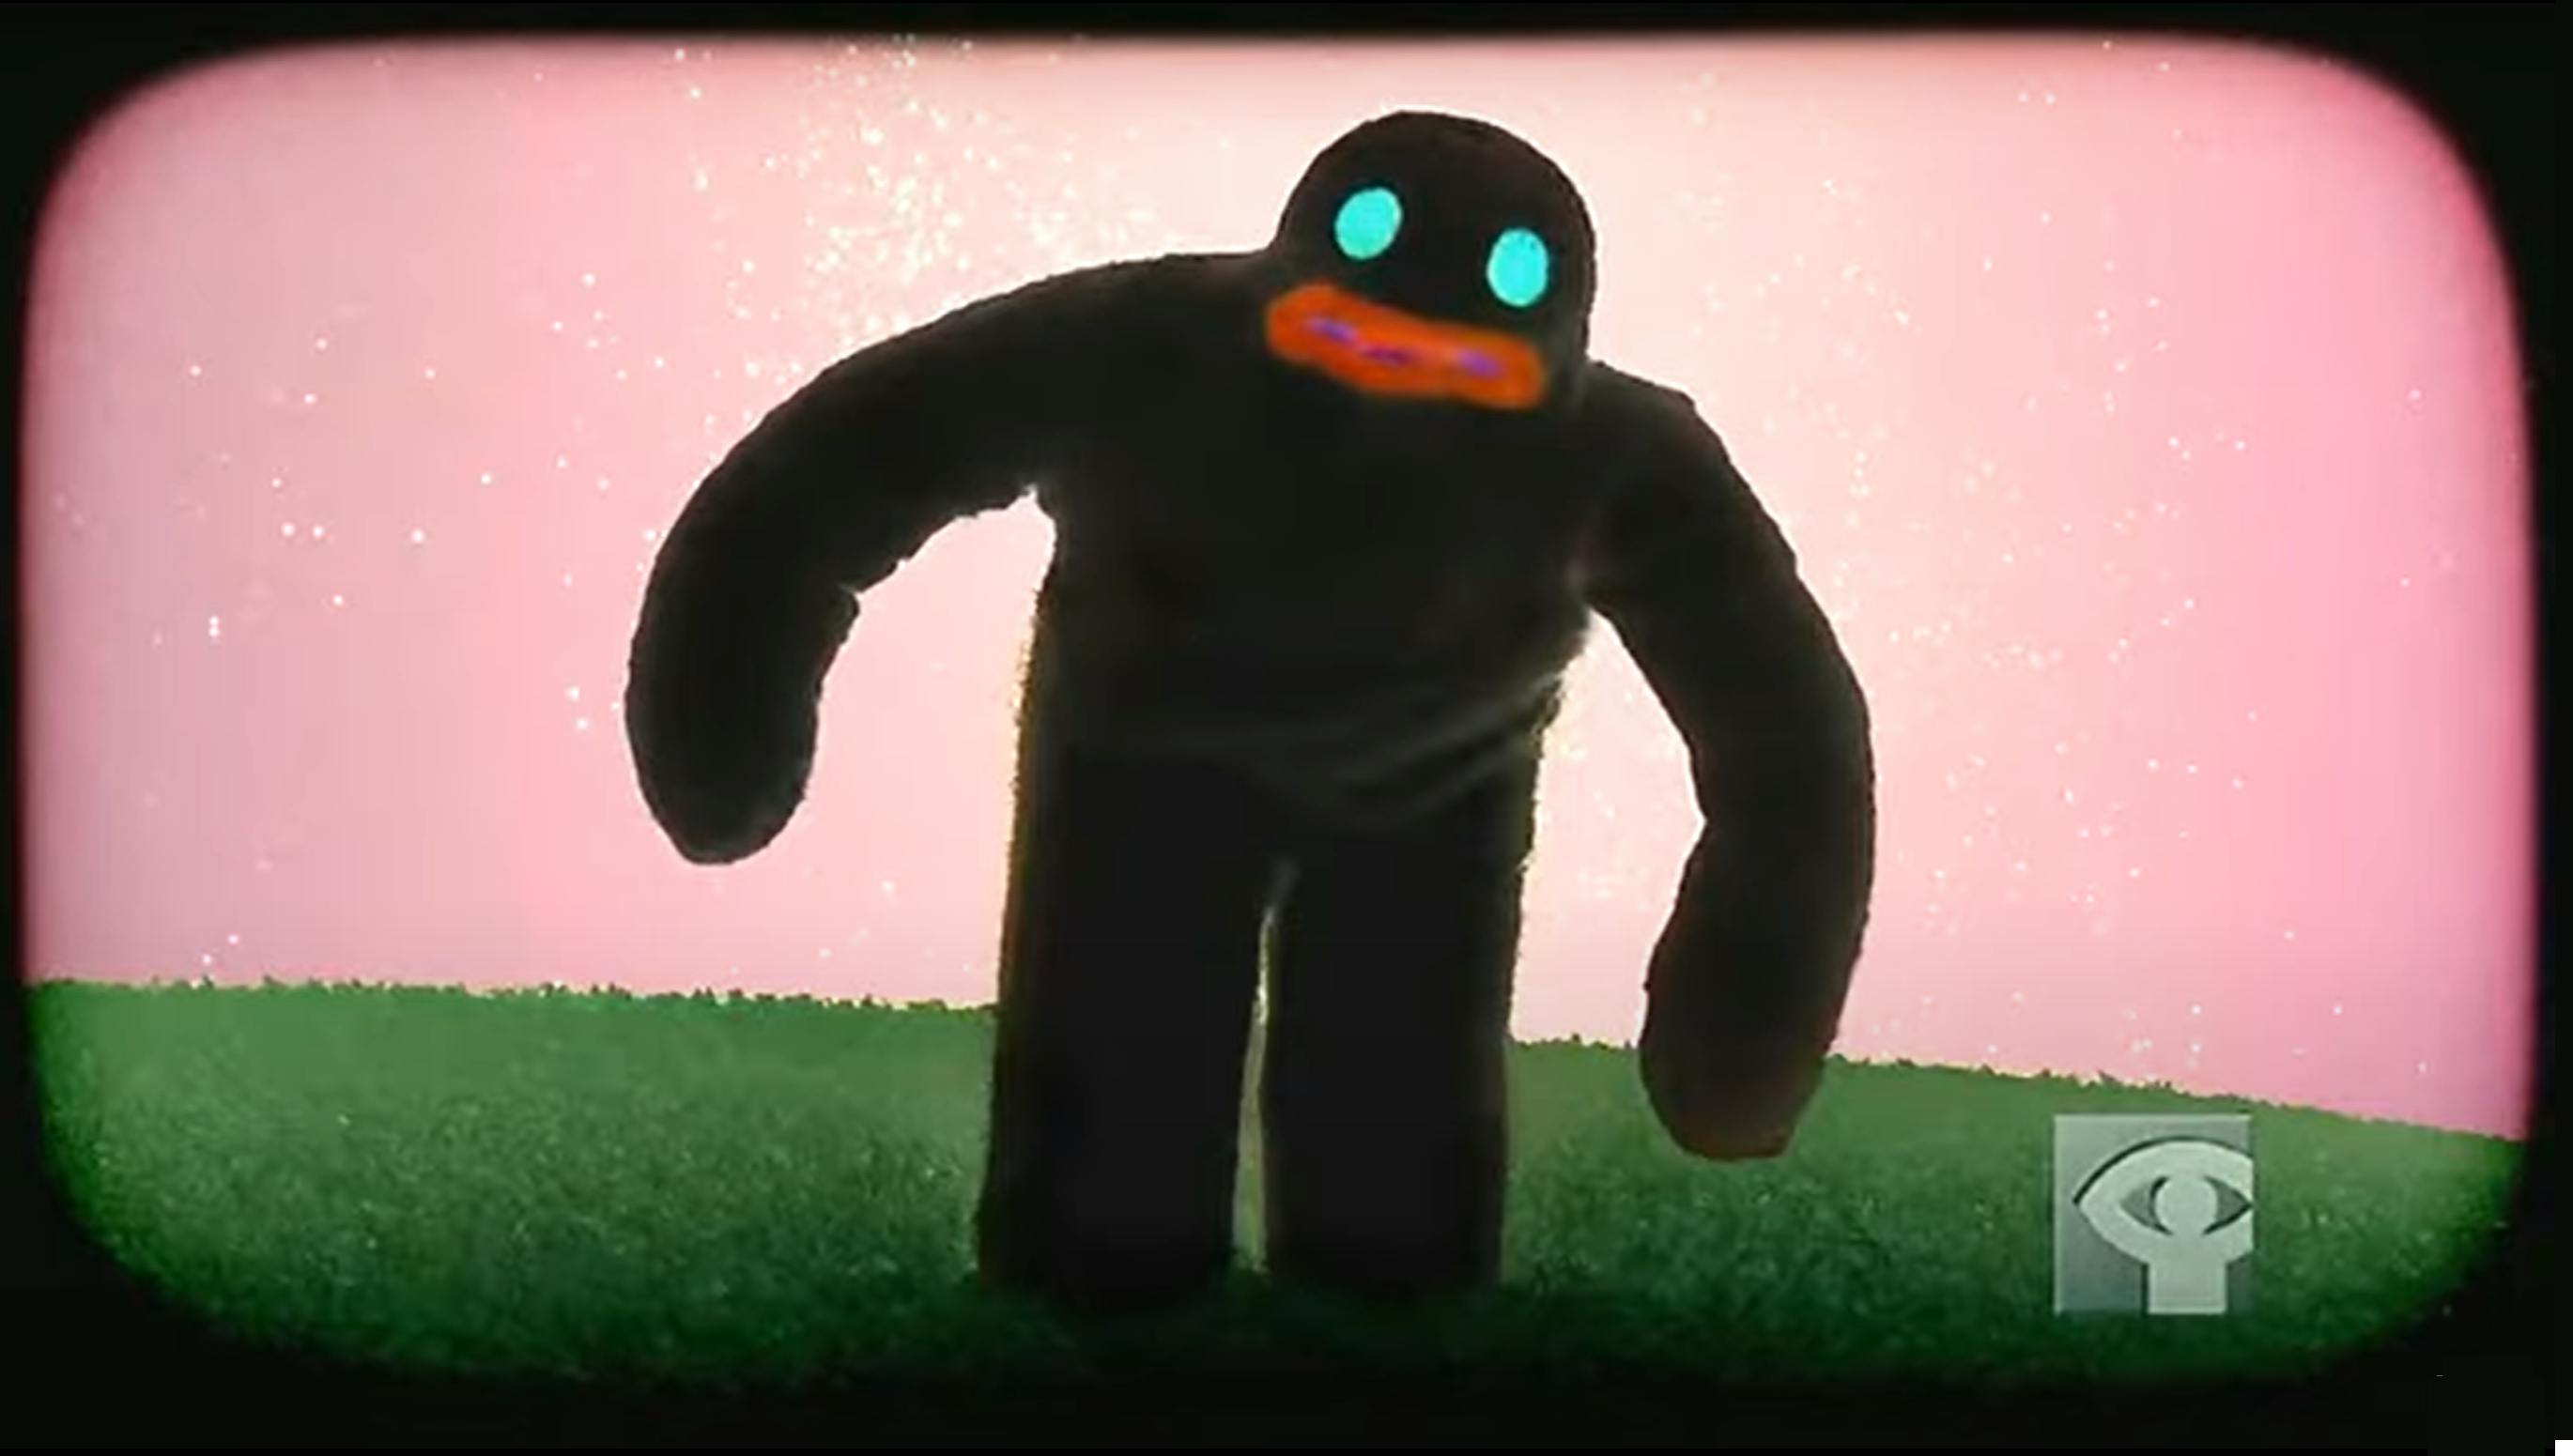 Image from Philip Eddoll's NFB film "Git Gob" - a creature with a black body, blue eyes and red lips looks questioning at the viewer through a vignette. They are in a field with a pink sky and green grass